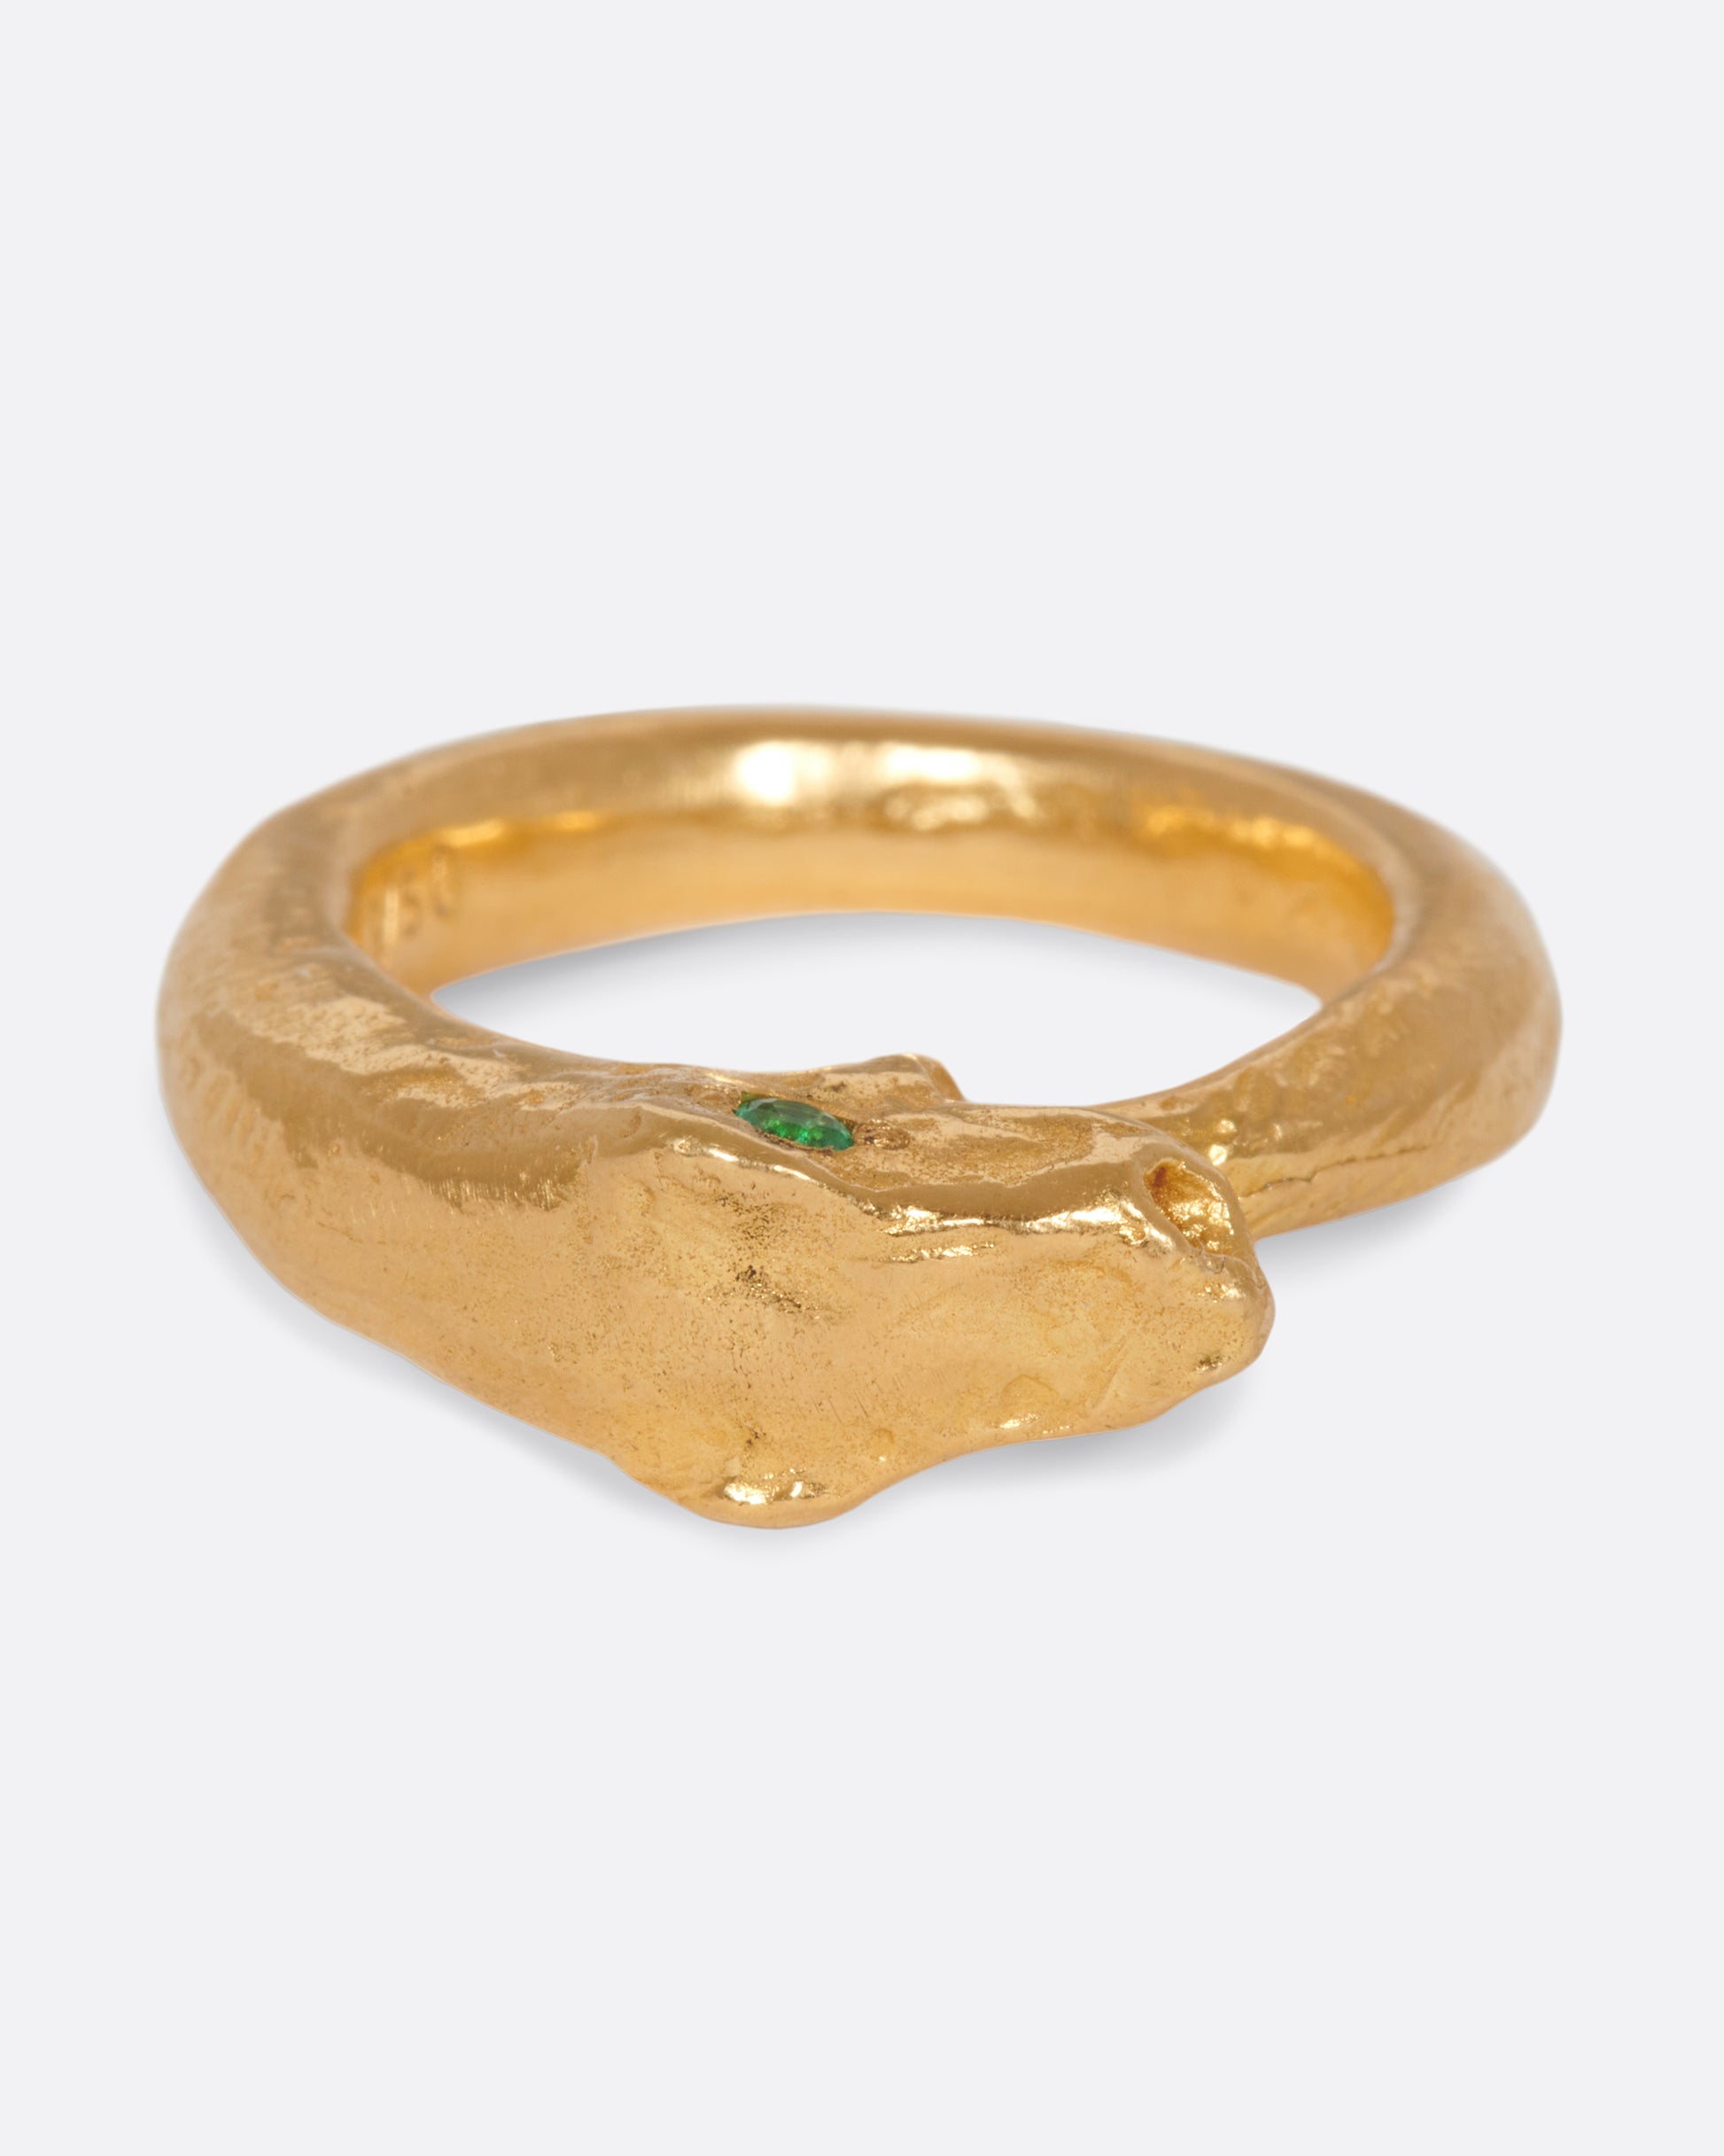 A high karat gold ouroboros ring showing a serpent catching its own tail.